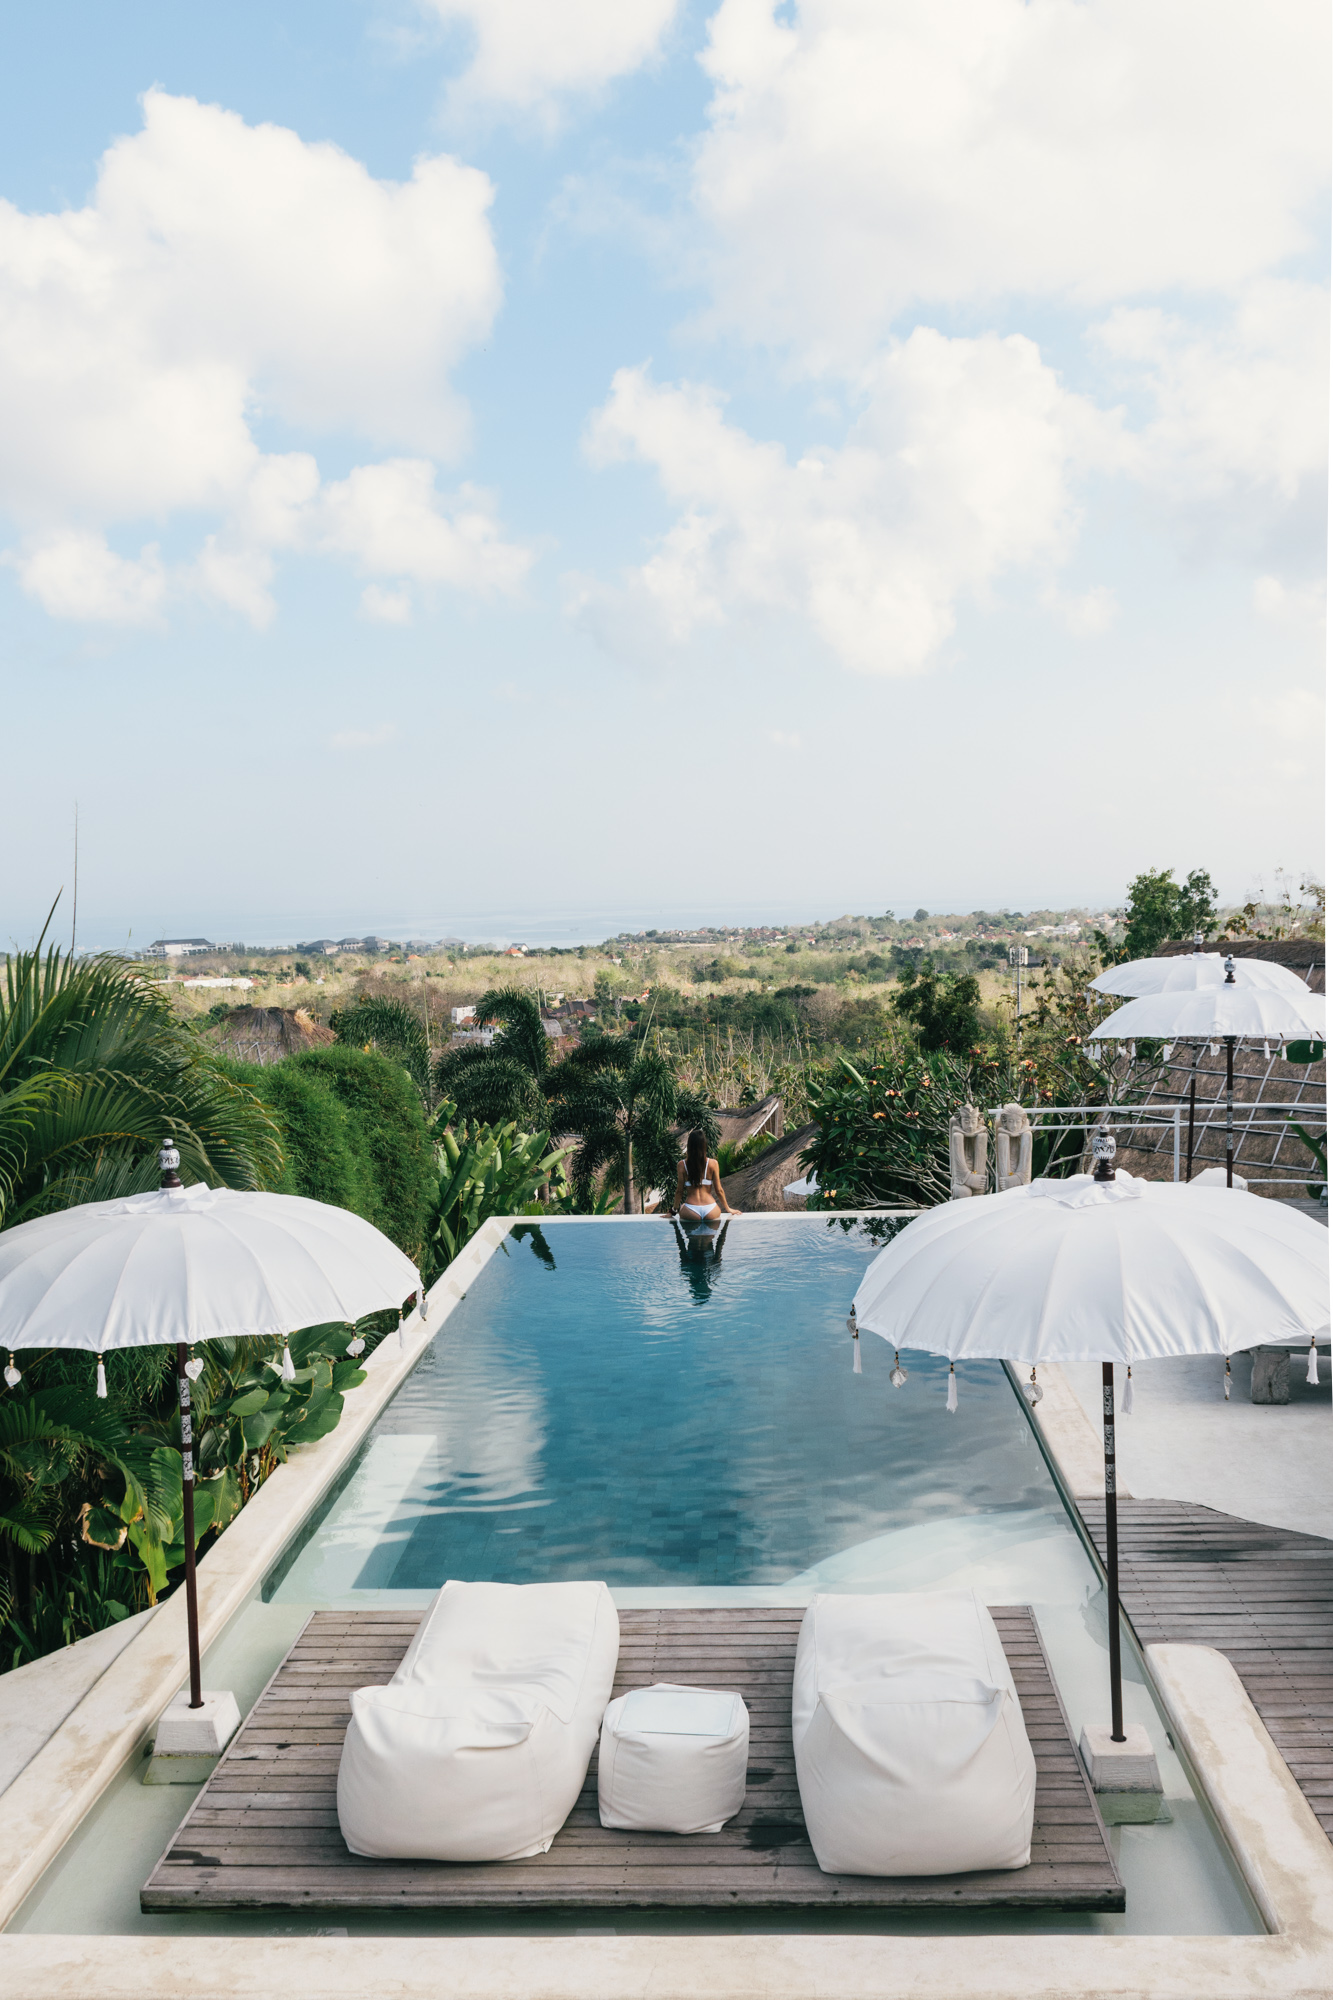 Bali: Things to Know Before to Go